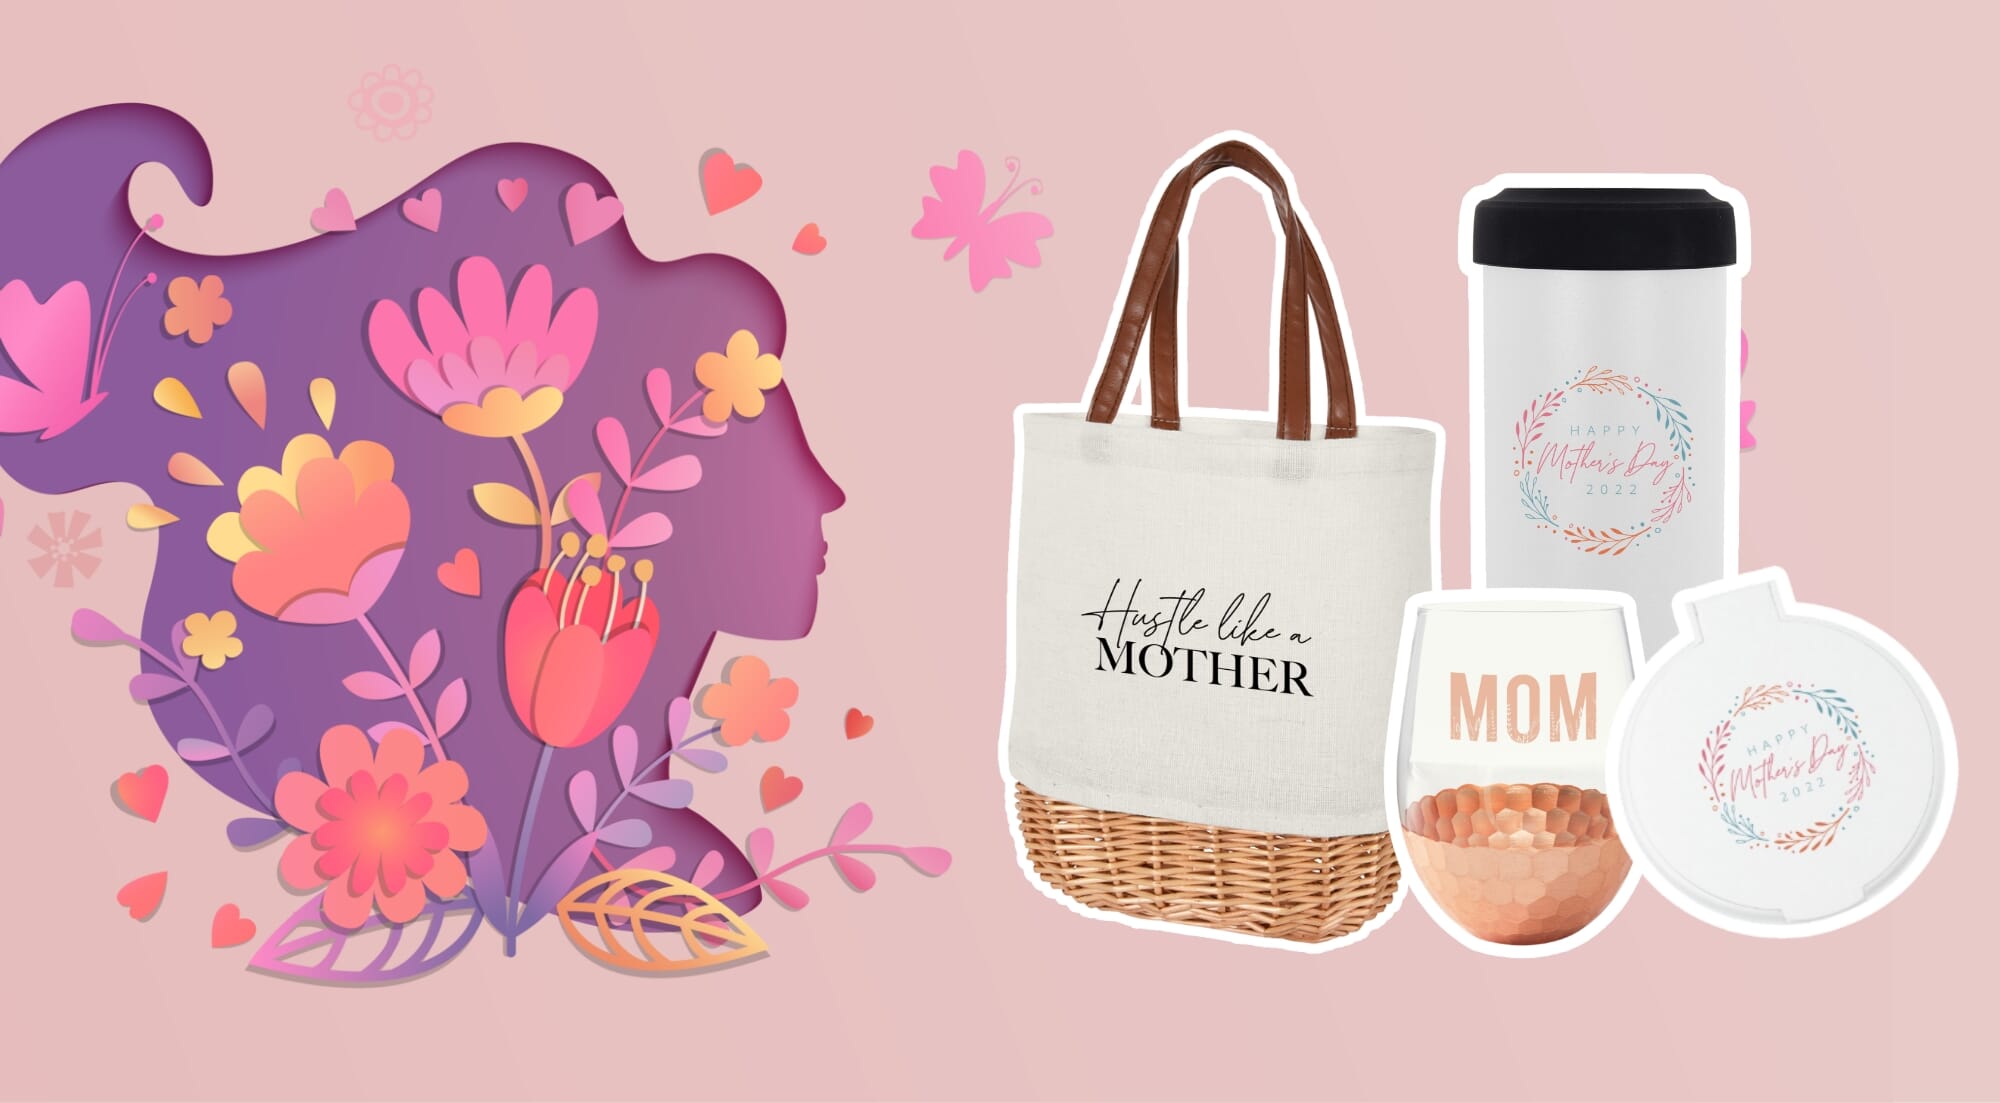 Celebrate Moms with the Custom <br>Mother’s Day Promotional Gifts